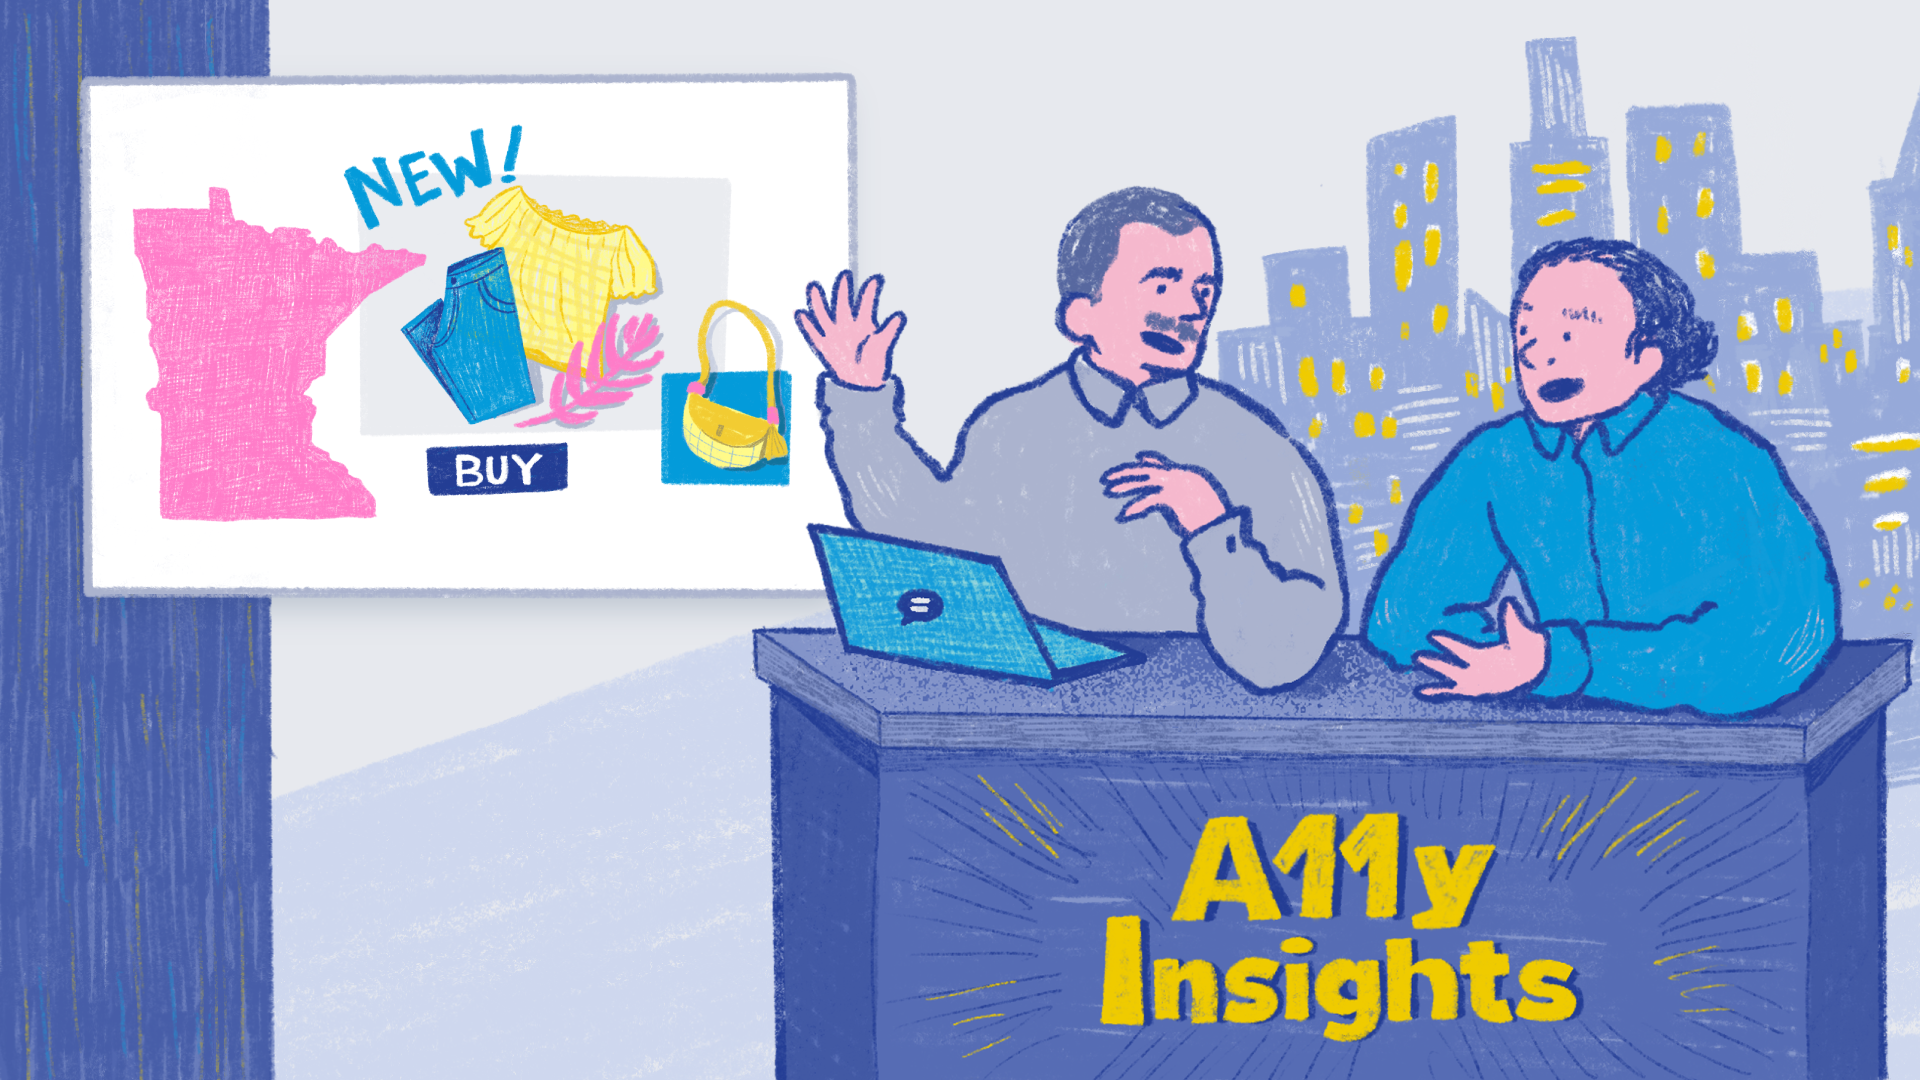 Illustration of Thomas and Ken at a desk with A11y Insights. Thomas has a laptop in front of him. A city skyline is in the distance behind them. The news window shows the state of Minnesota and new clothes with a buy button